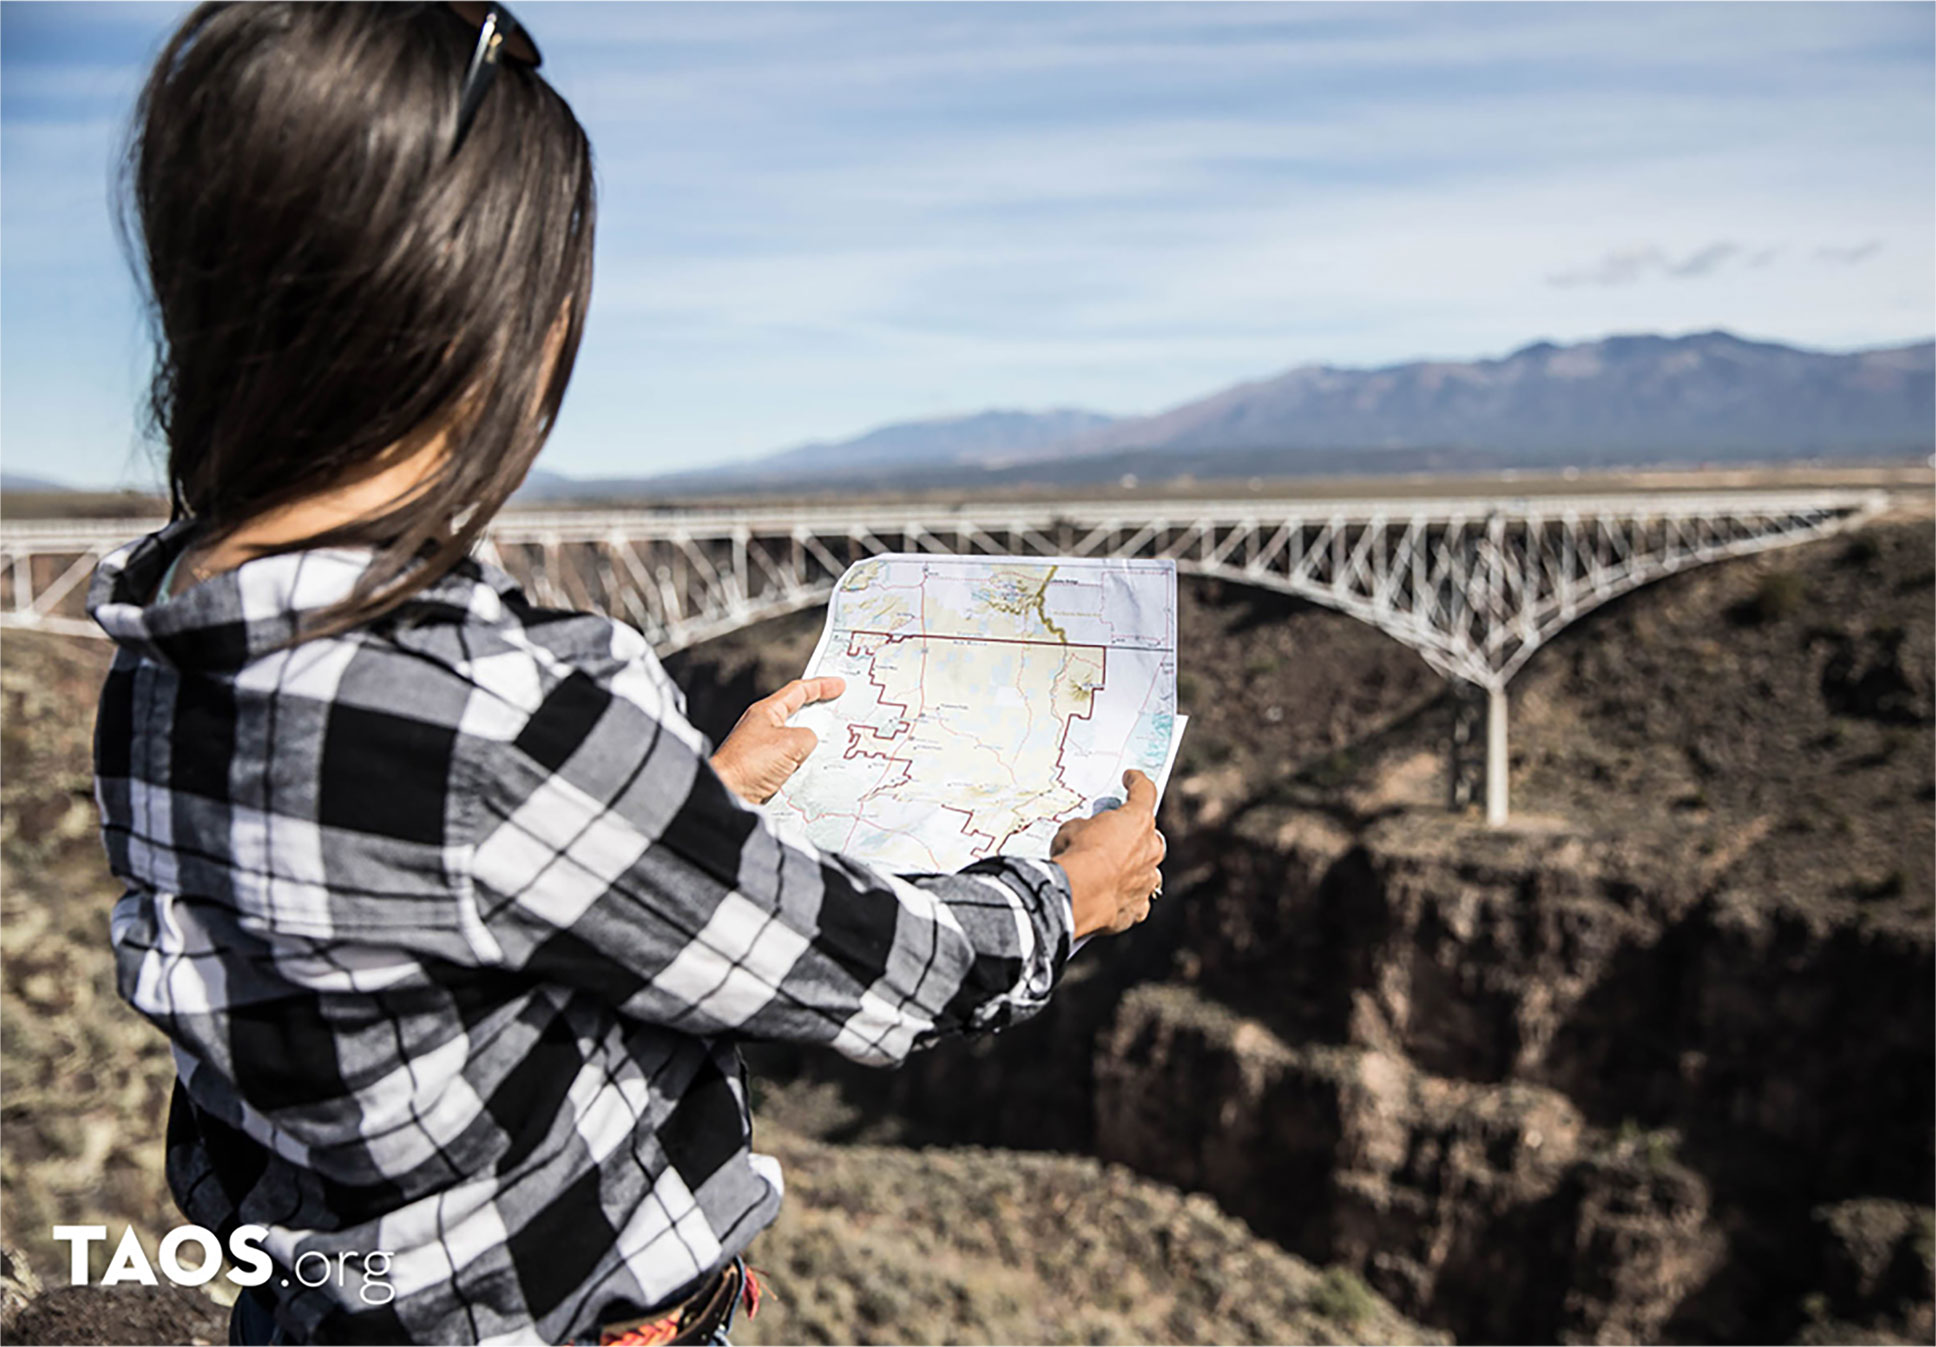 Heritage Inspirations guide holding a map at the Rio Grande Gorge Bridge in Taos, New Mexico.